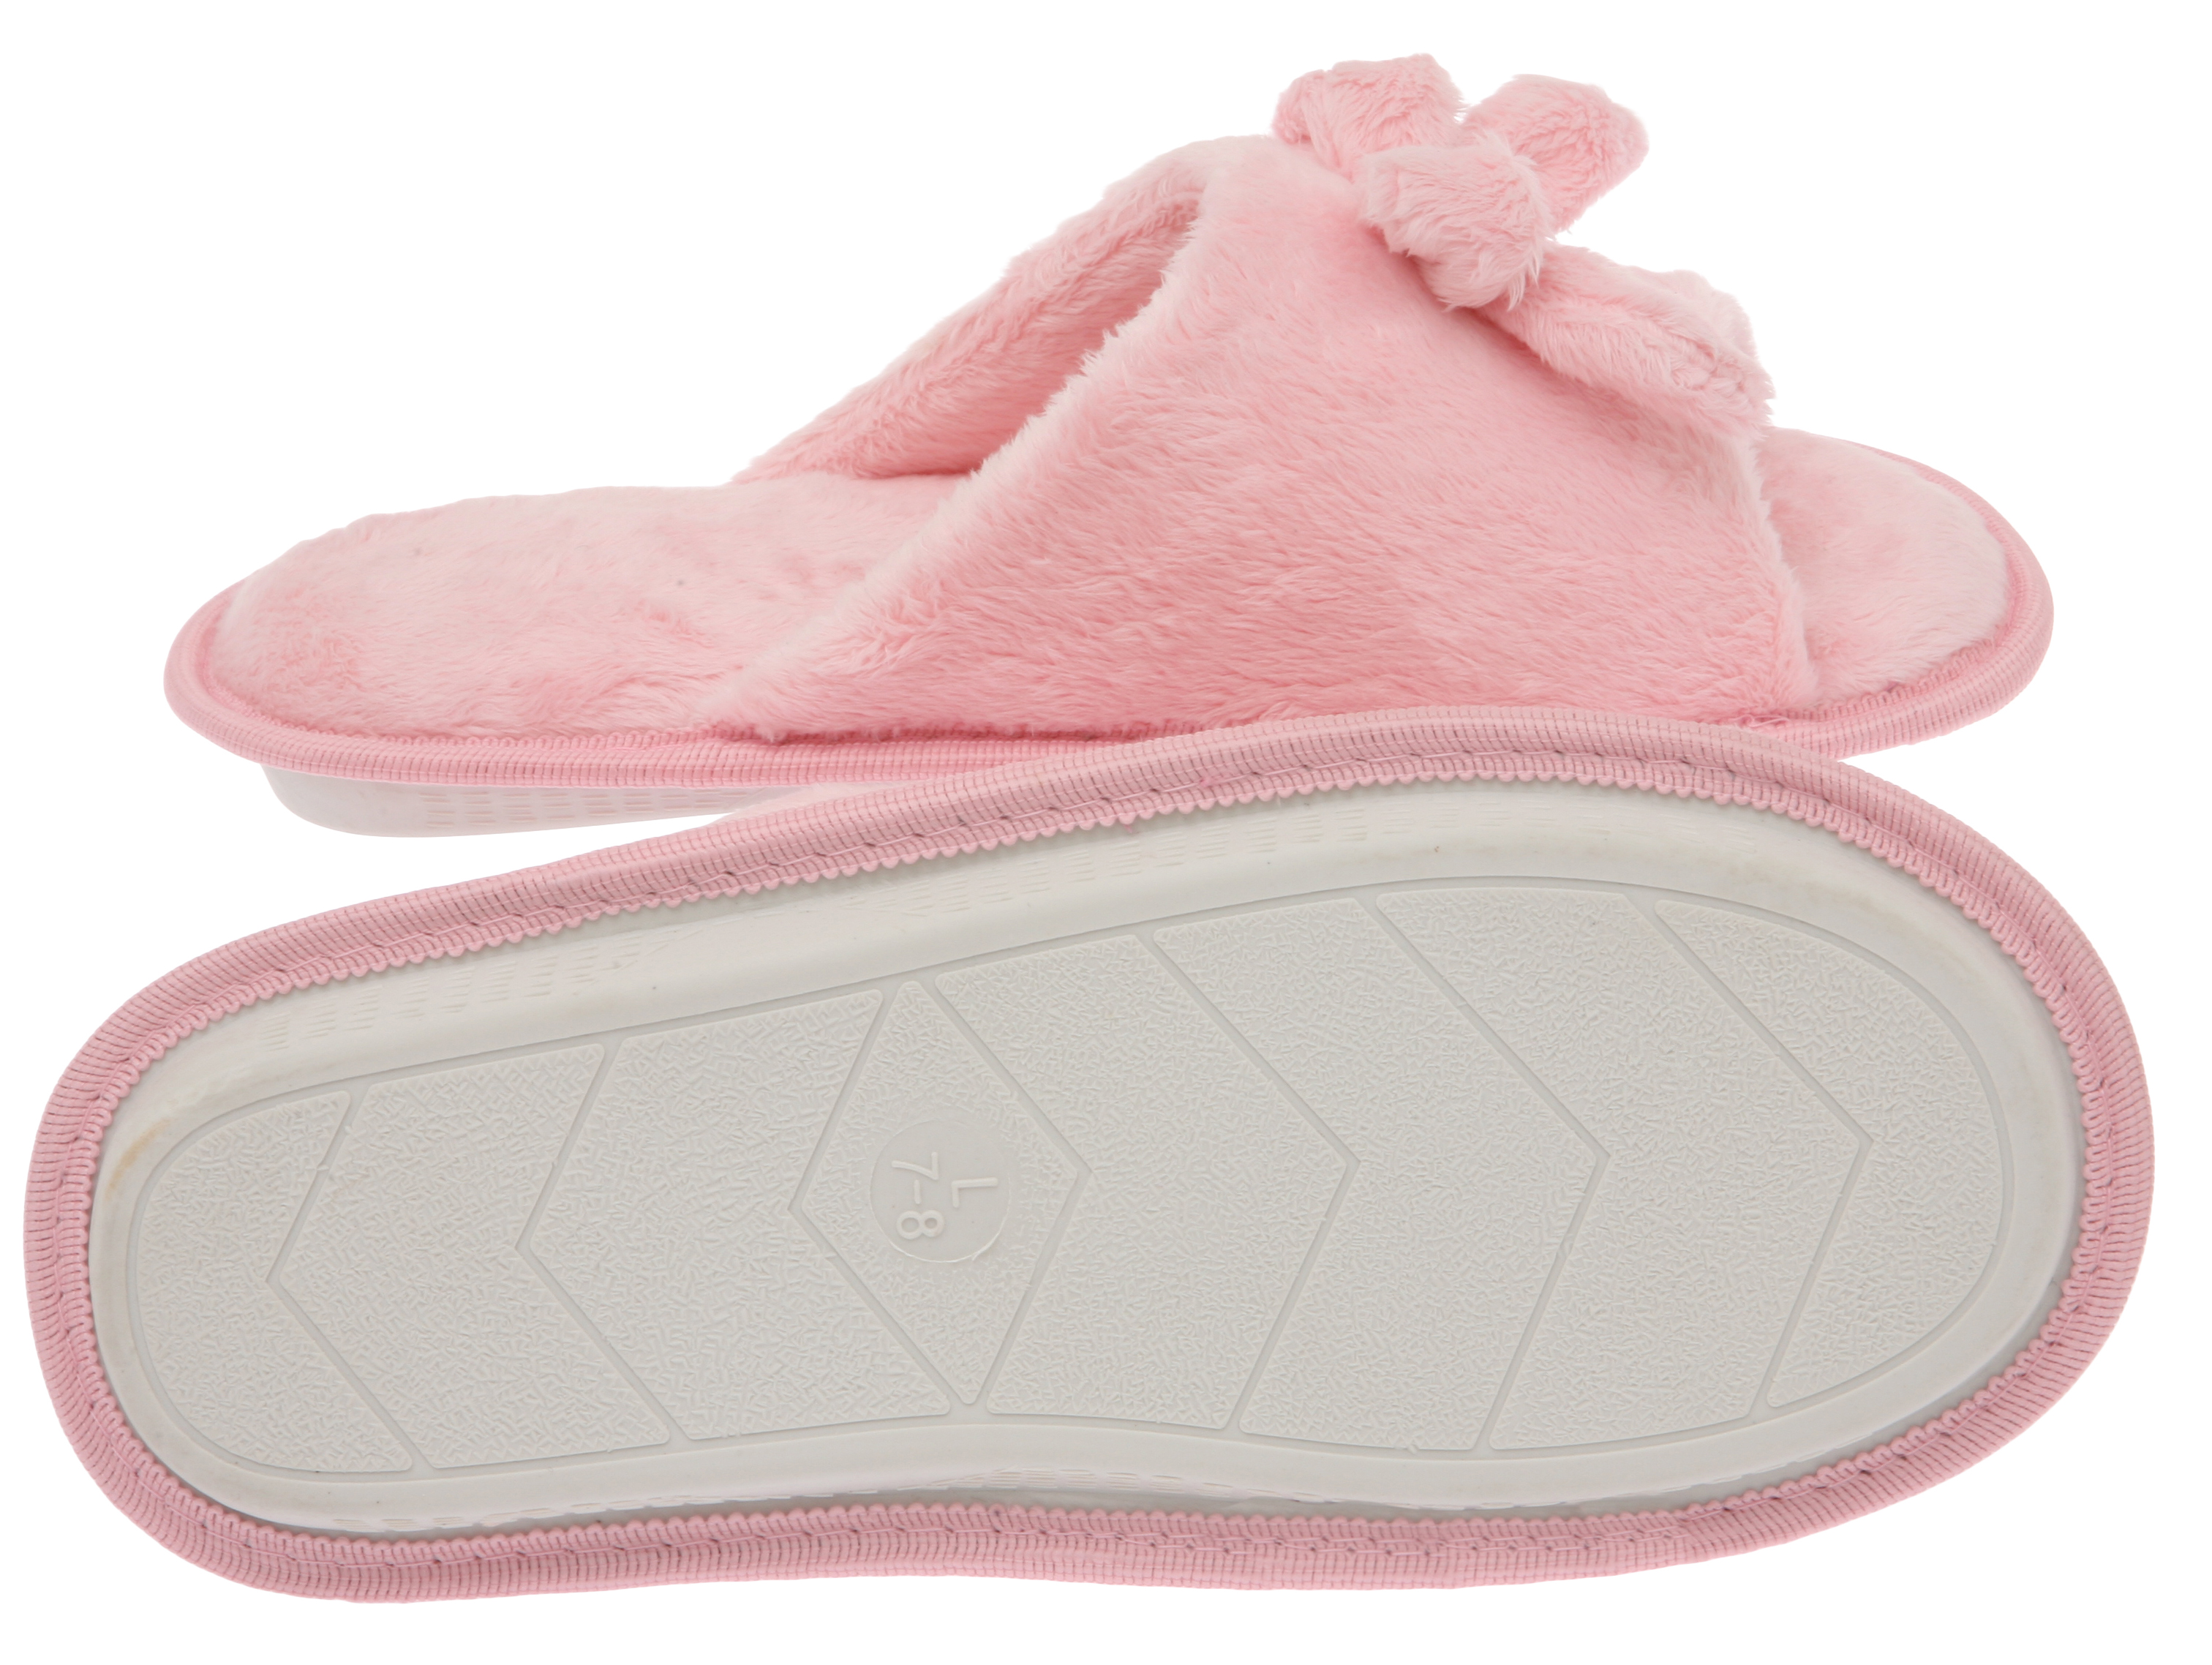 Living Healthy Products Womens Butterfly Bow Slip-On Memory Foam House Slippers, Size 5-6 - Open Toe - Pamper Your Feet - Pink